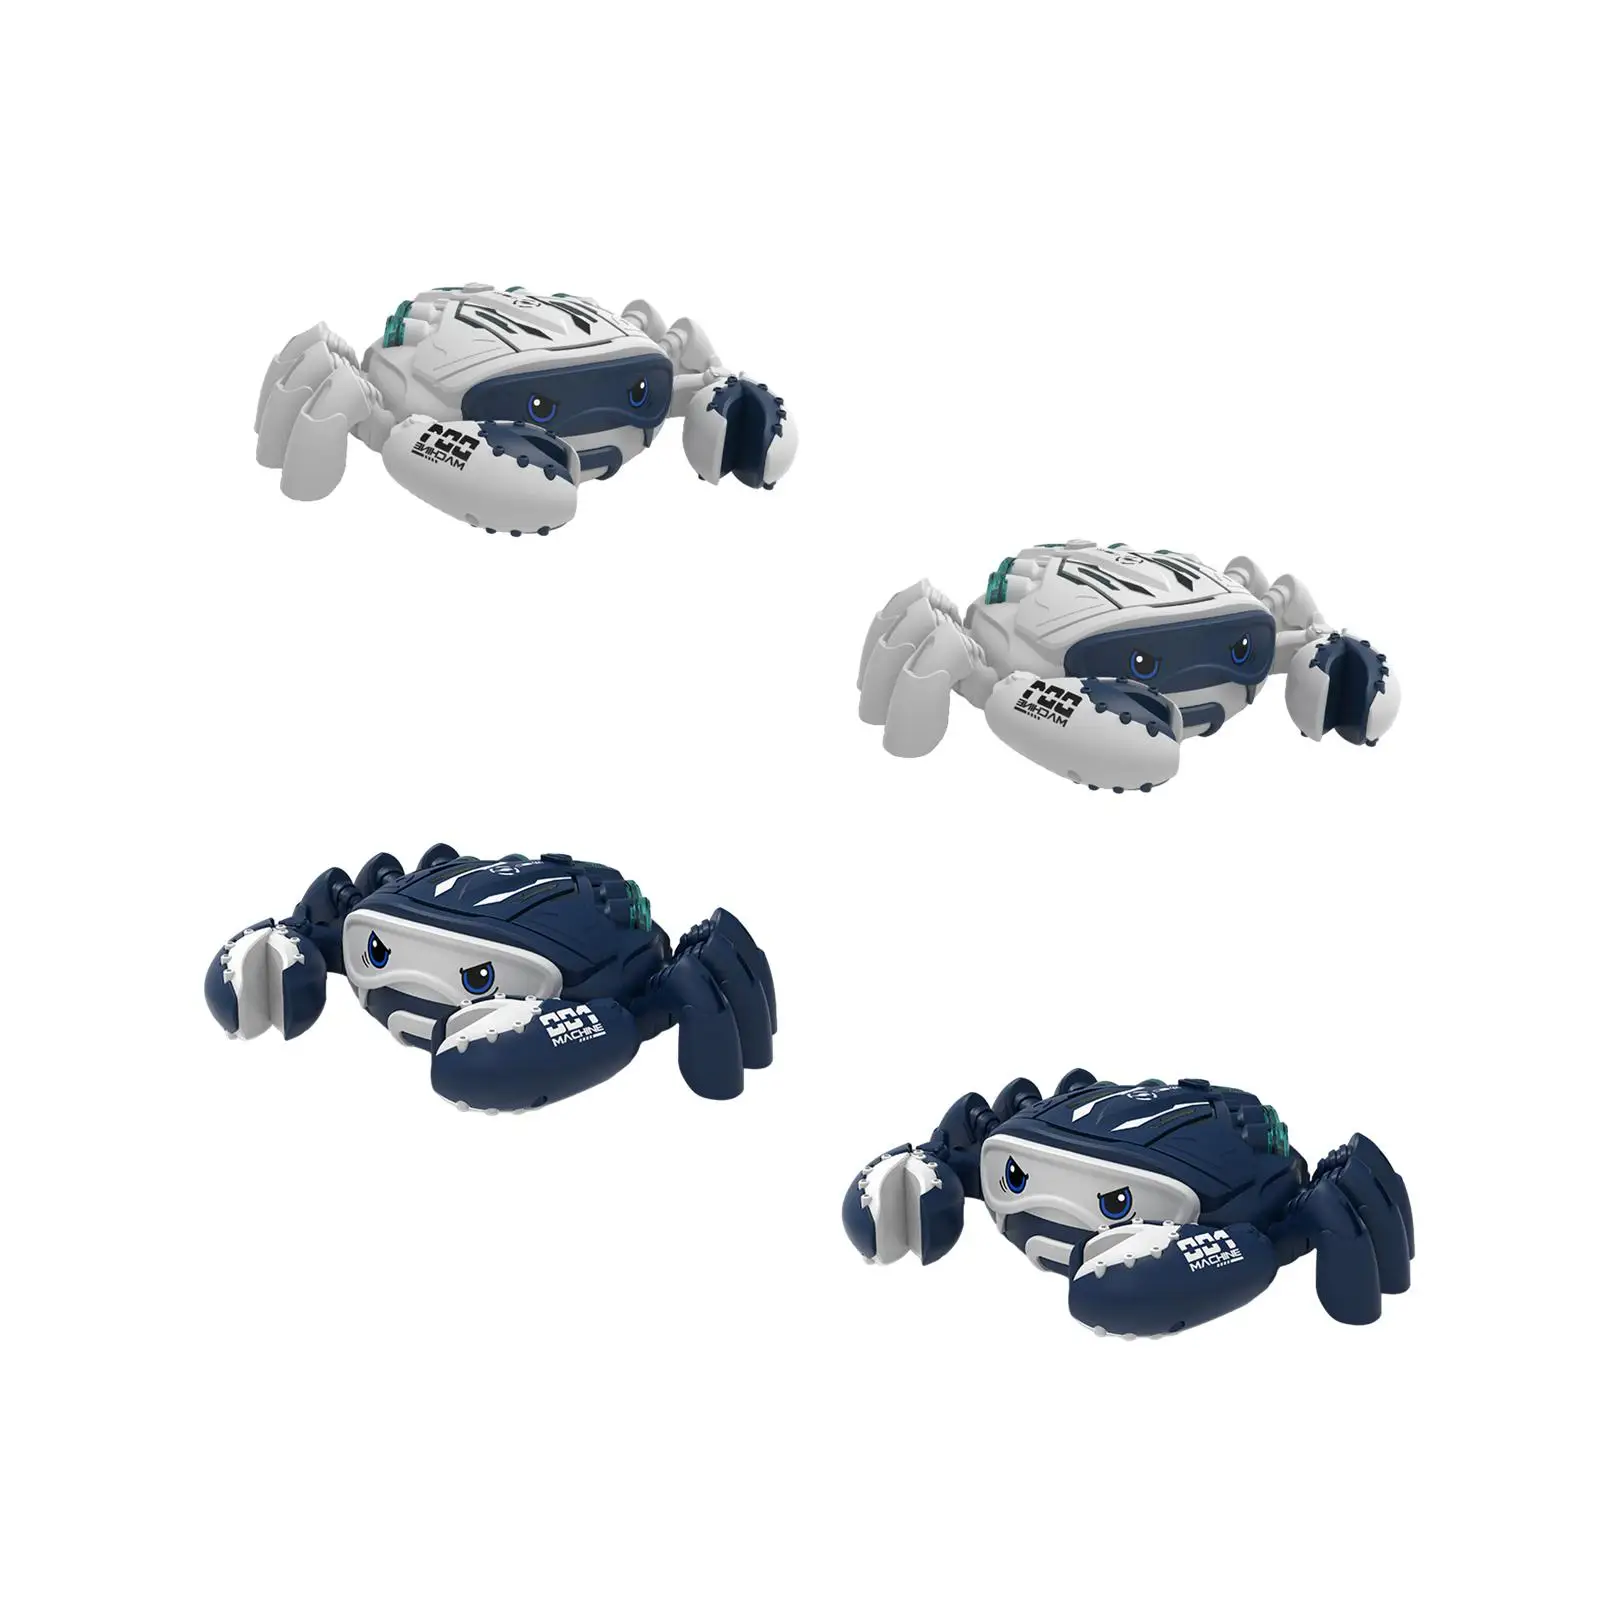 Crawling Toy Crabs Baby Toys Interactive Electric Walking Toys for Kids Electric Crabs Toy Musical Toys Boys Girls Gifts